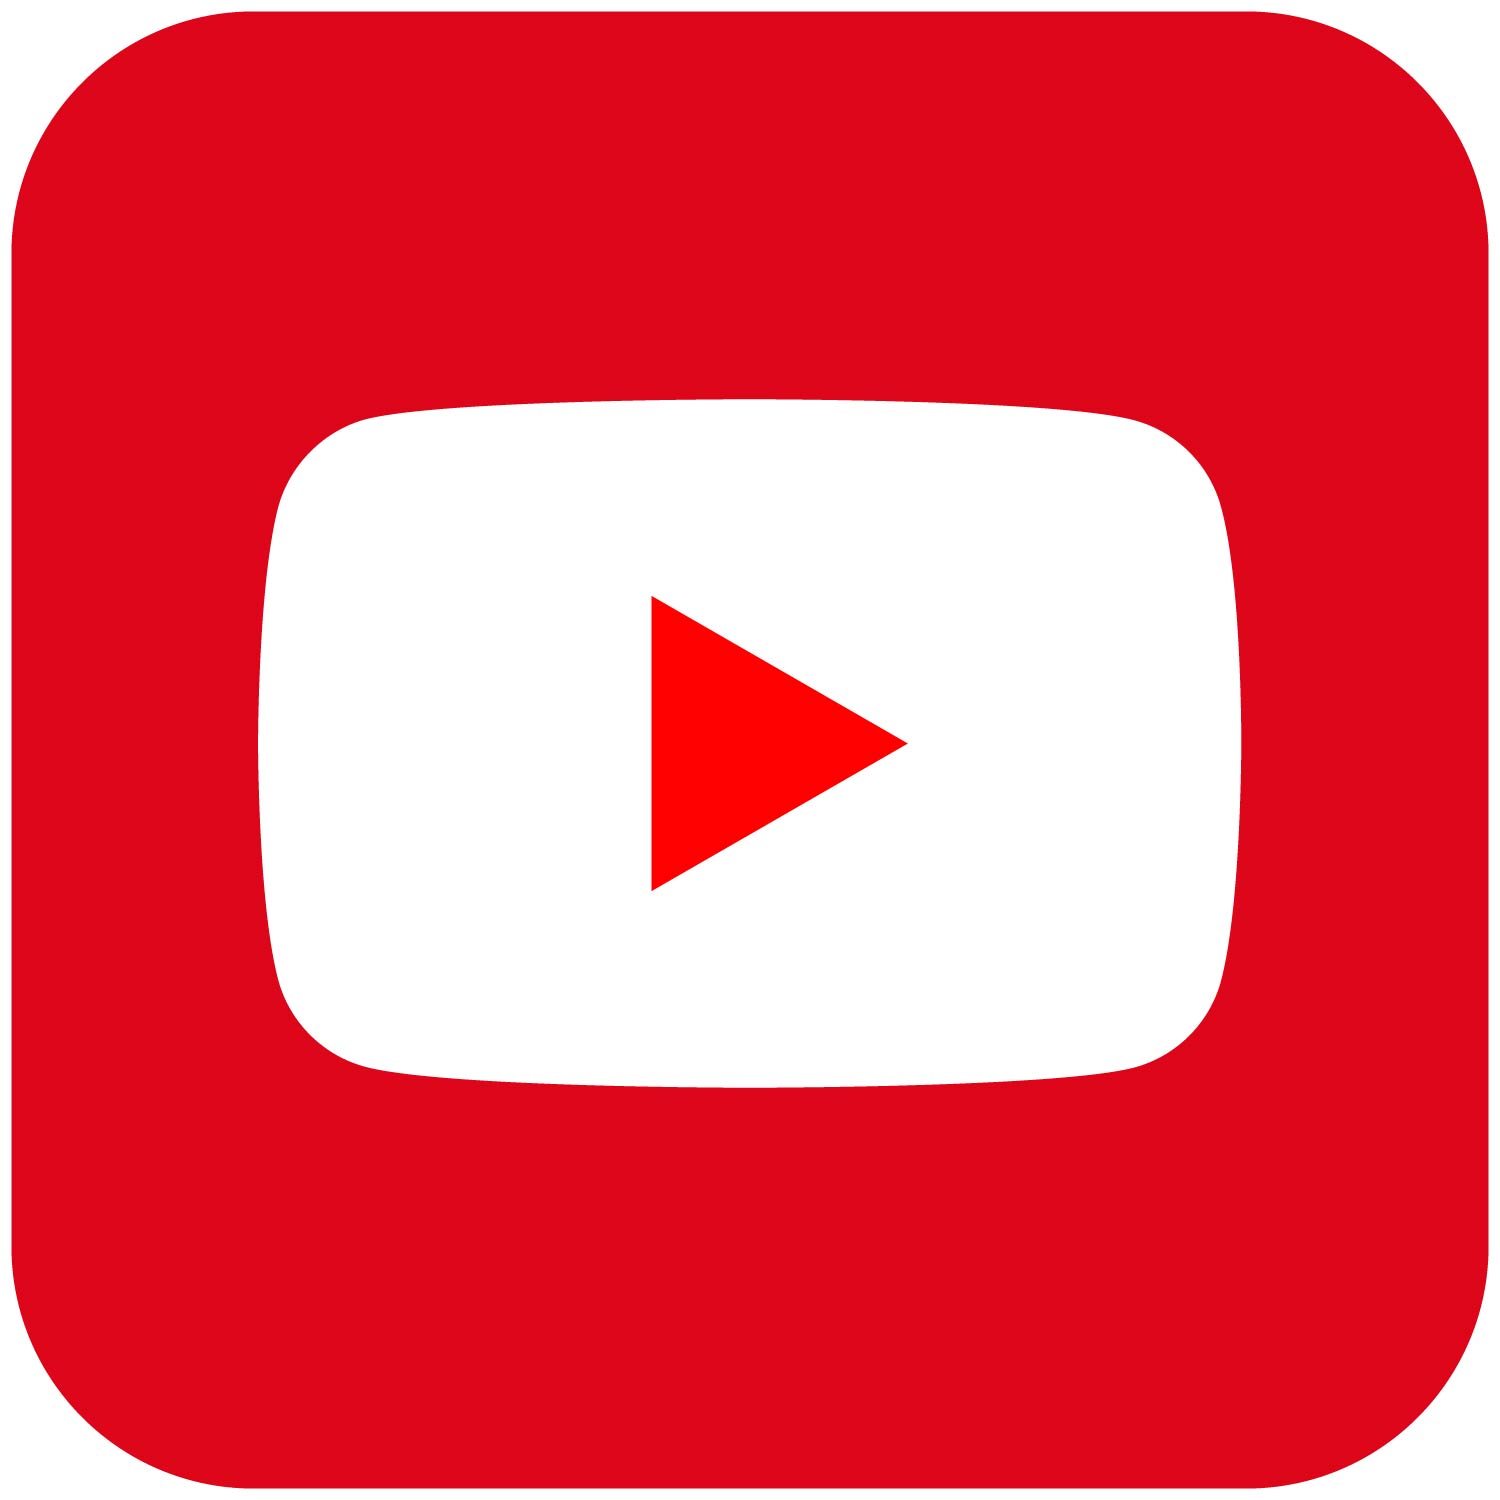 Youtube Rounded Square Icon